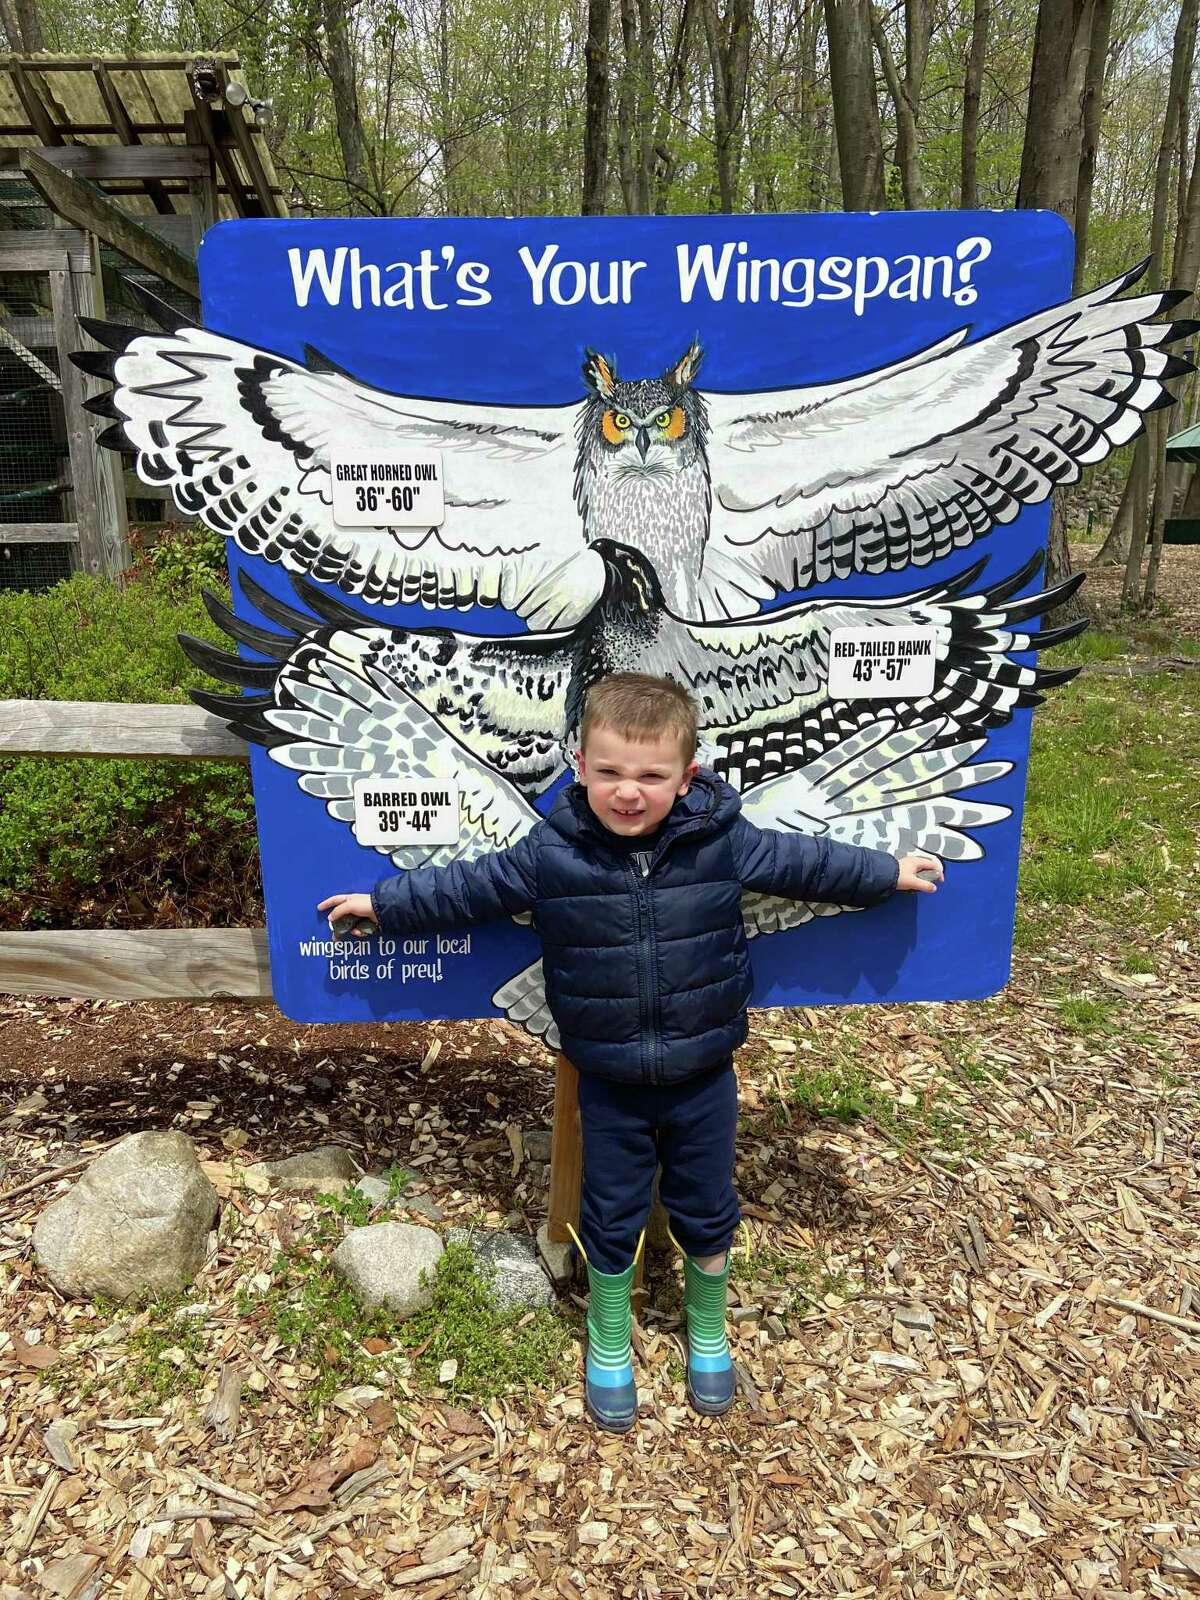 Jase Bradshaw of Ridgefield spreads his wings near the bird enclosures at Woodcock Nature Center. The new sign shows the spirit, if not the actual design, of new educational signs Woodcock is hoping to add to its trails.